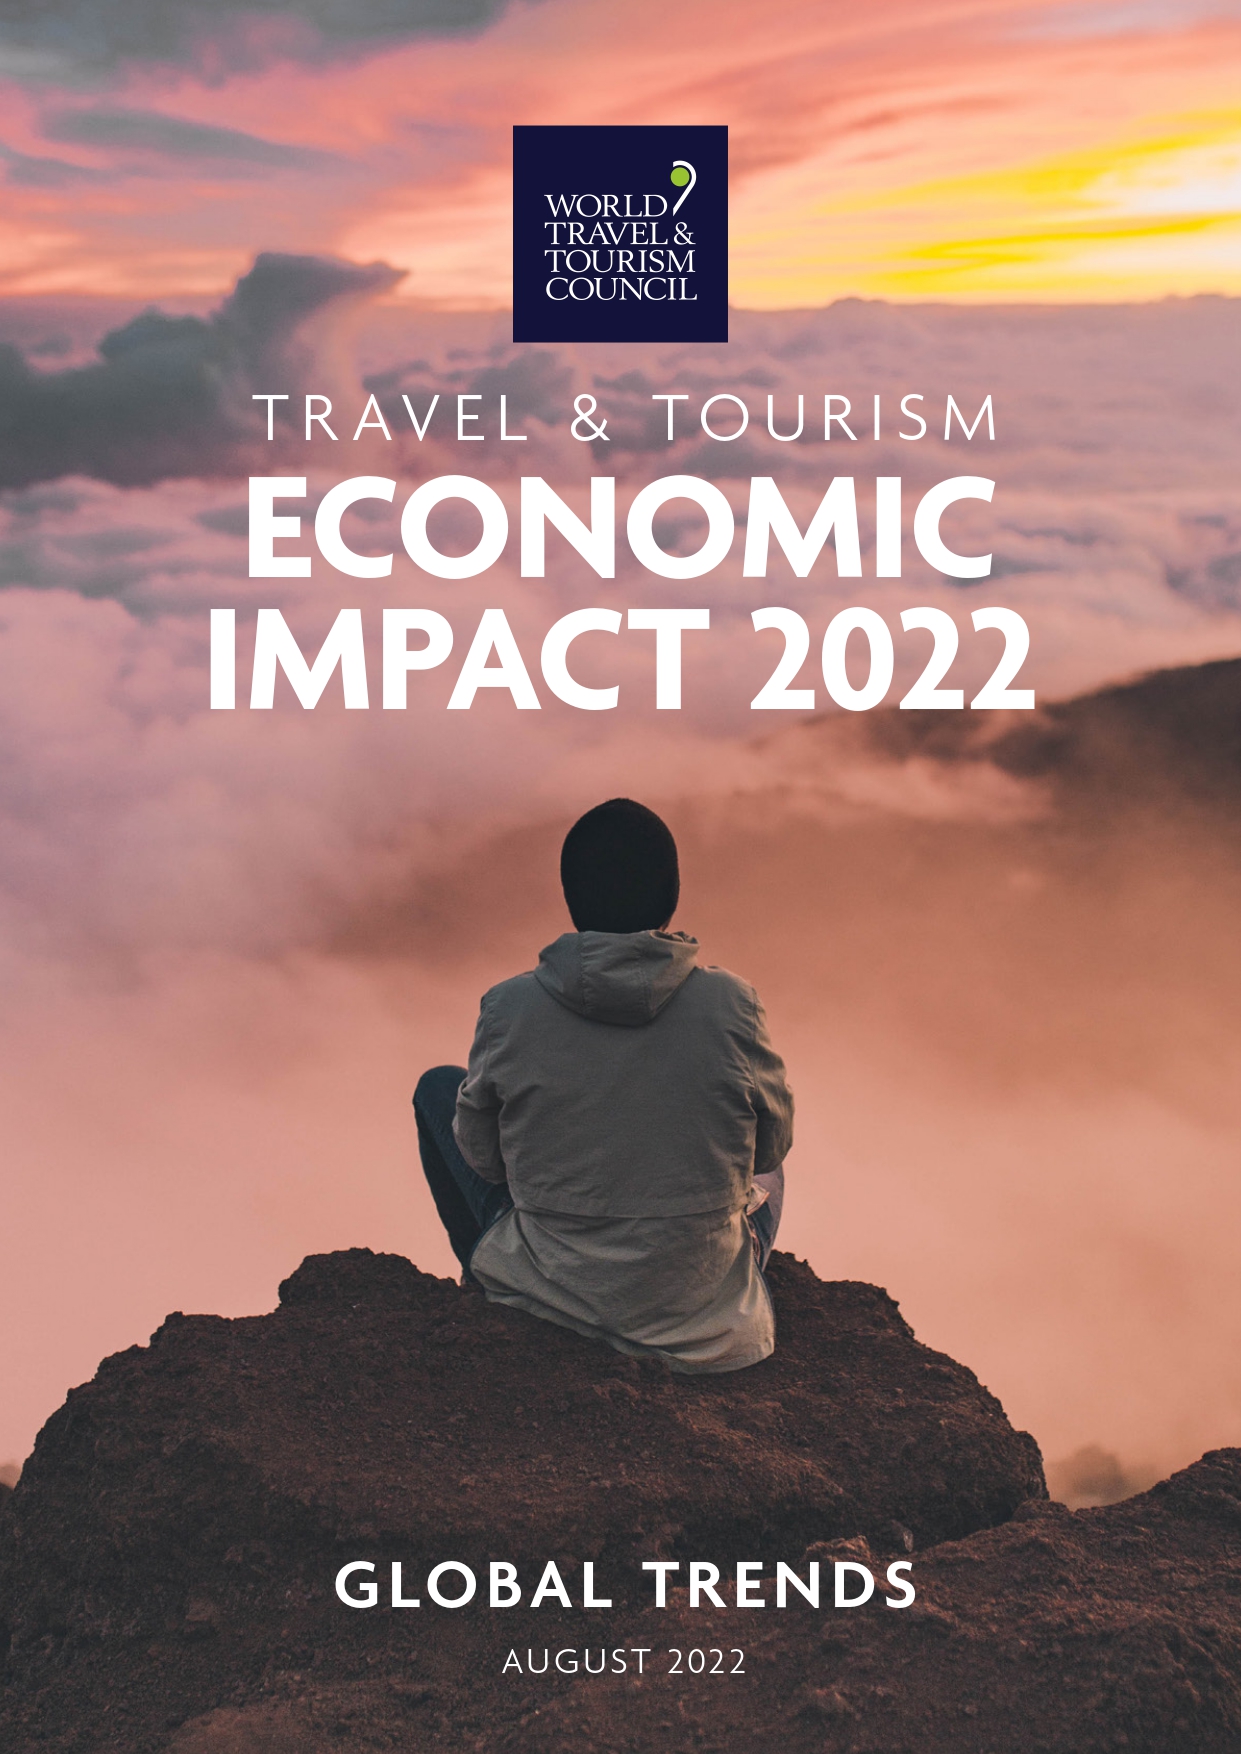 impact of tourism on foreign exchange